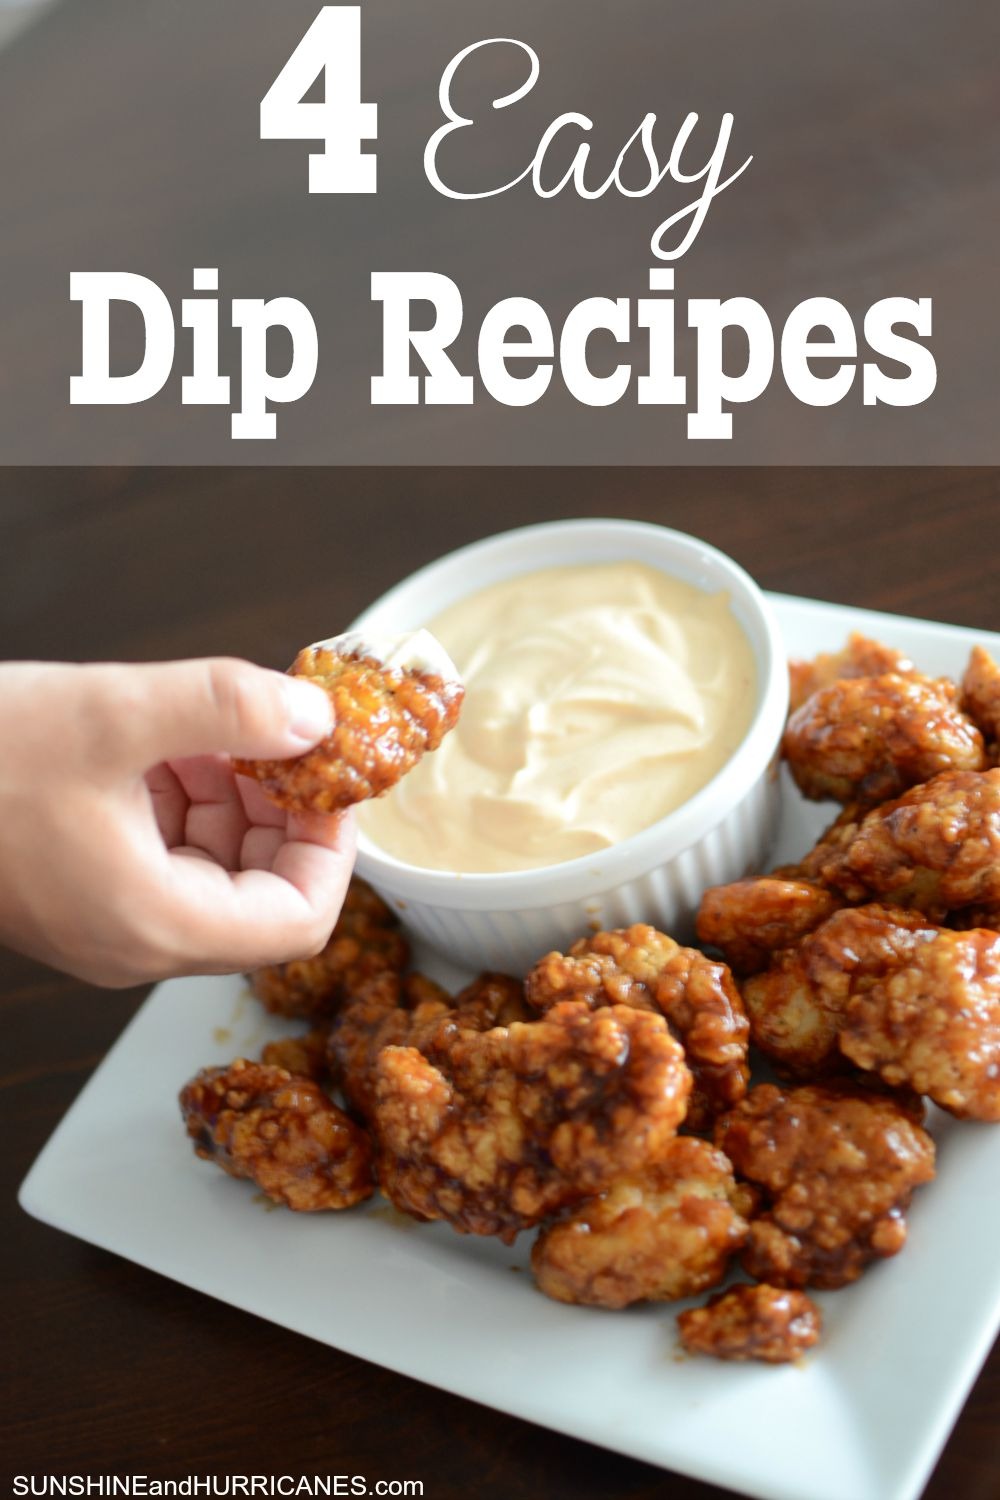 Looking for a quick and easy option for after school snacks, a quick dinner or even a game day munchies? We've got four delicious dips recipes that are crowd pleasers and can go with everything from veggies, wings, nuggets and more.  Yum! 4 Easy Dip Recipes. SunshineandHurricanes.com